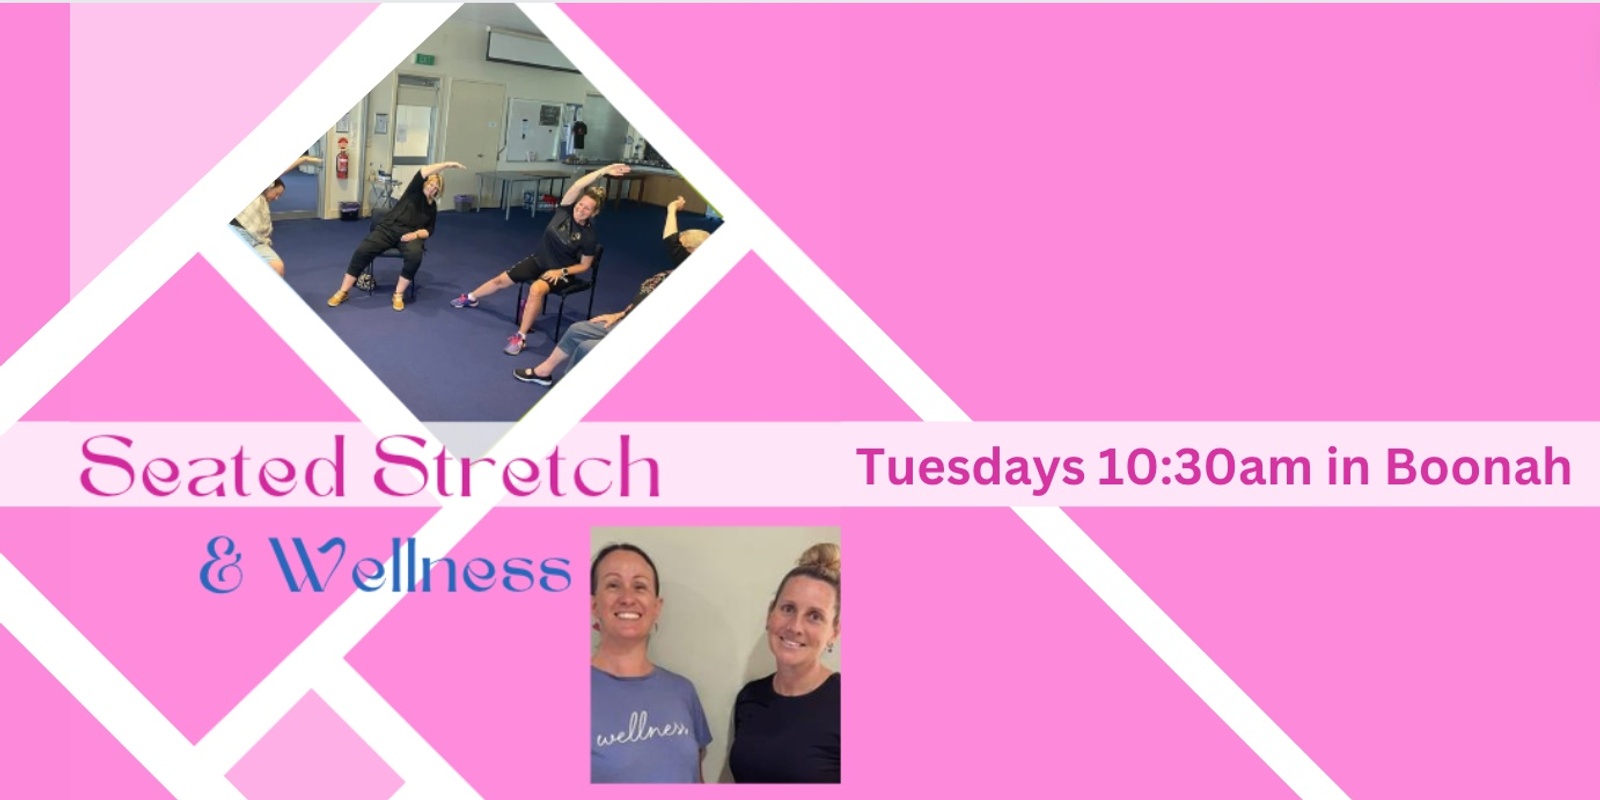 Banner image for Seated Stretches & Wellness weekly classes in Boonah